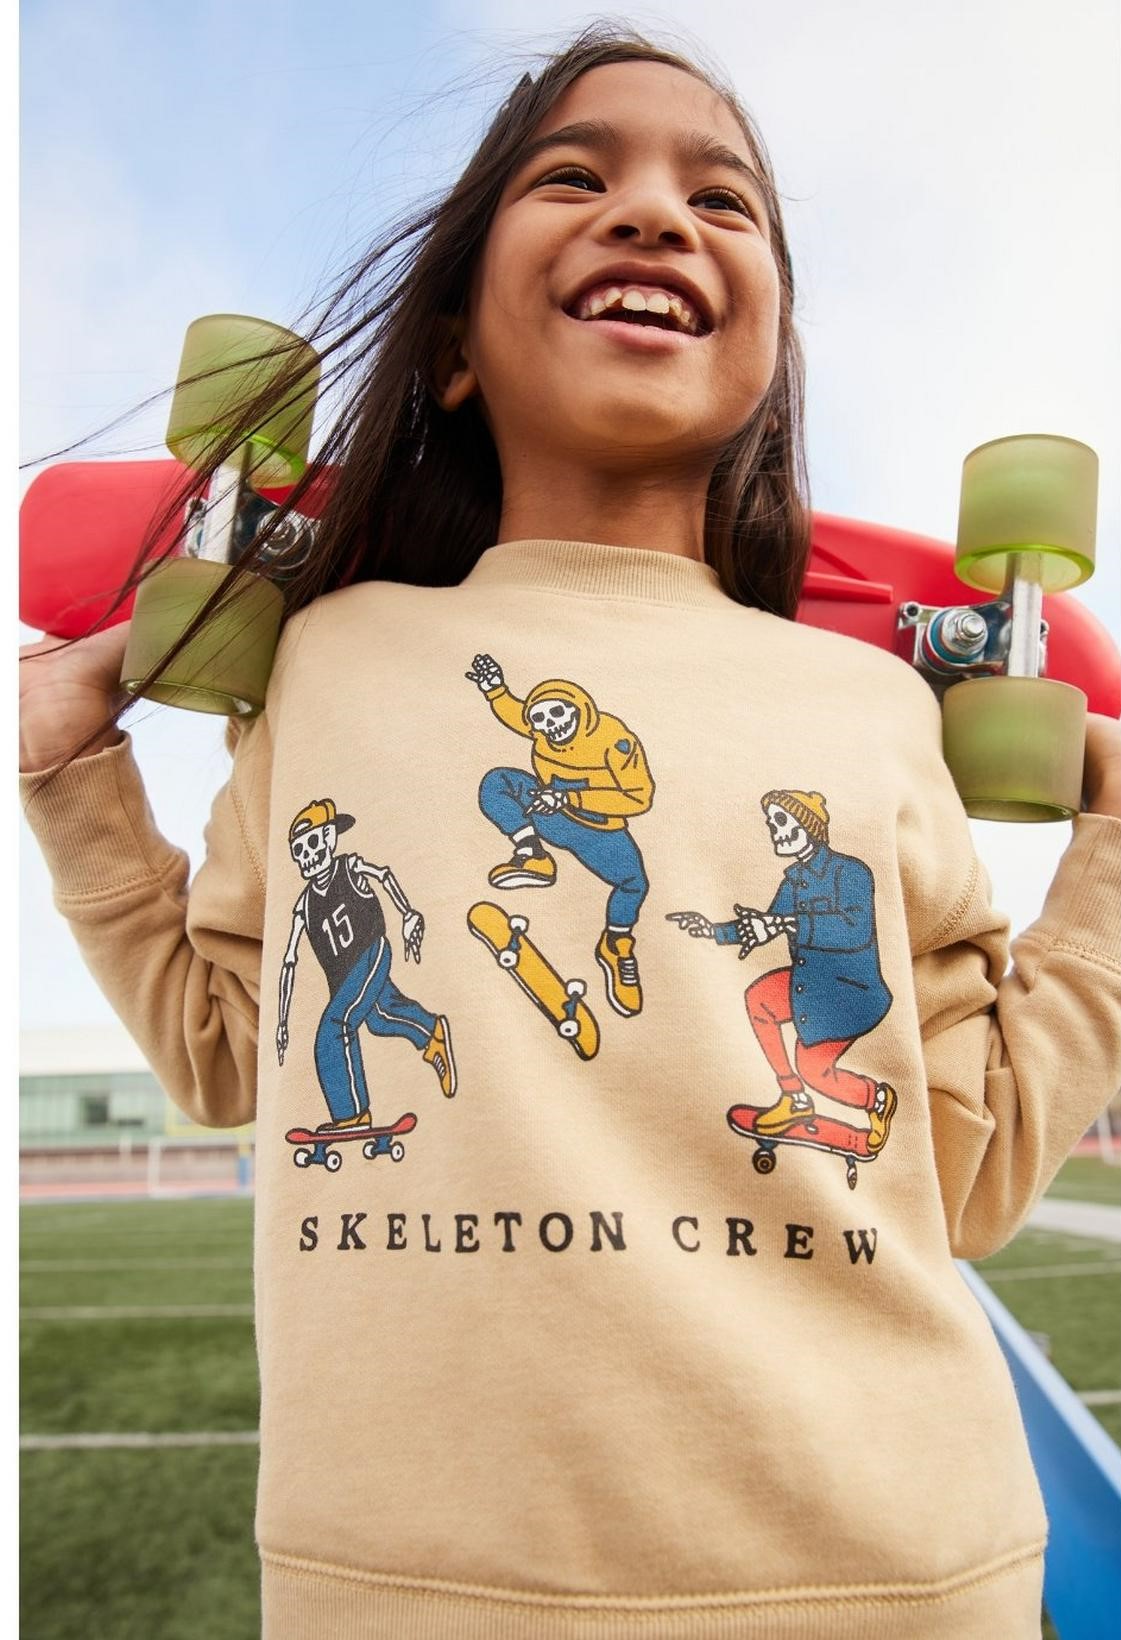 image of a girl wearing a graphic sweatshirt and holding a skateboard behind her back